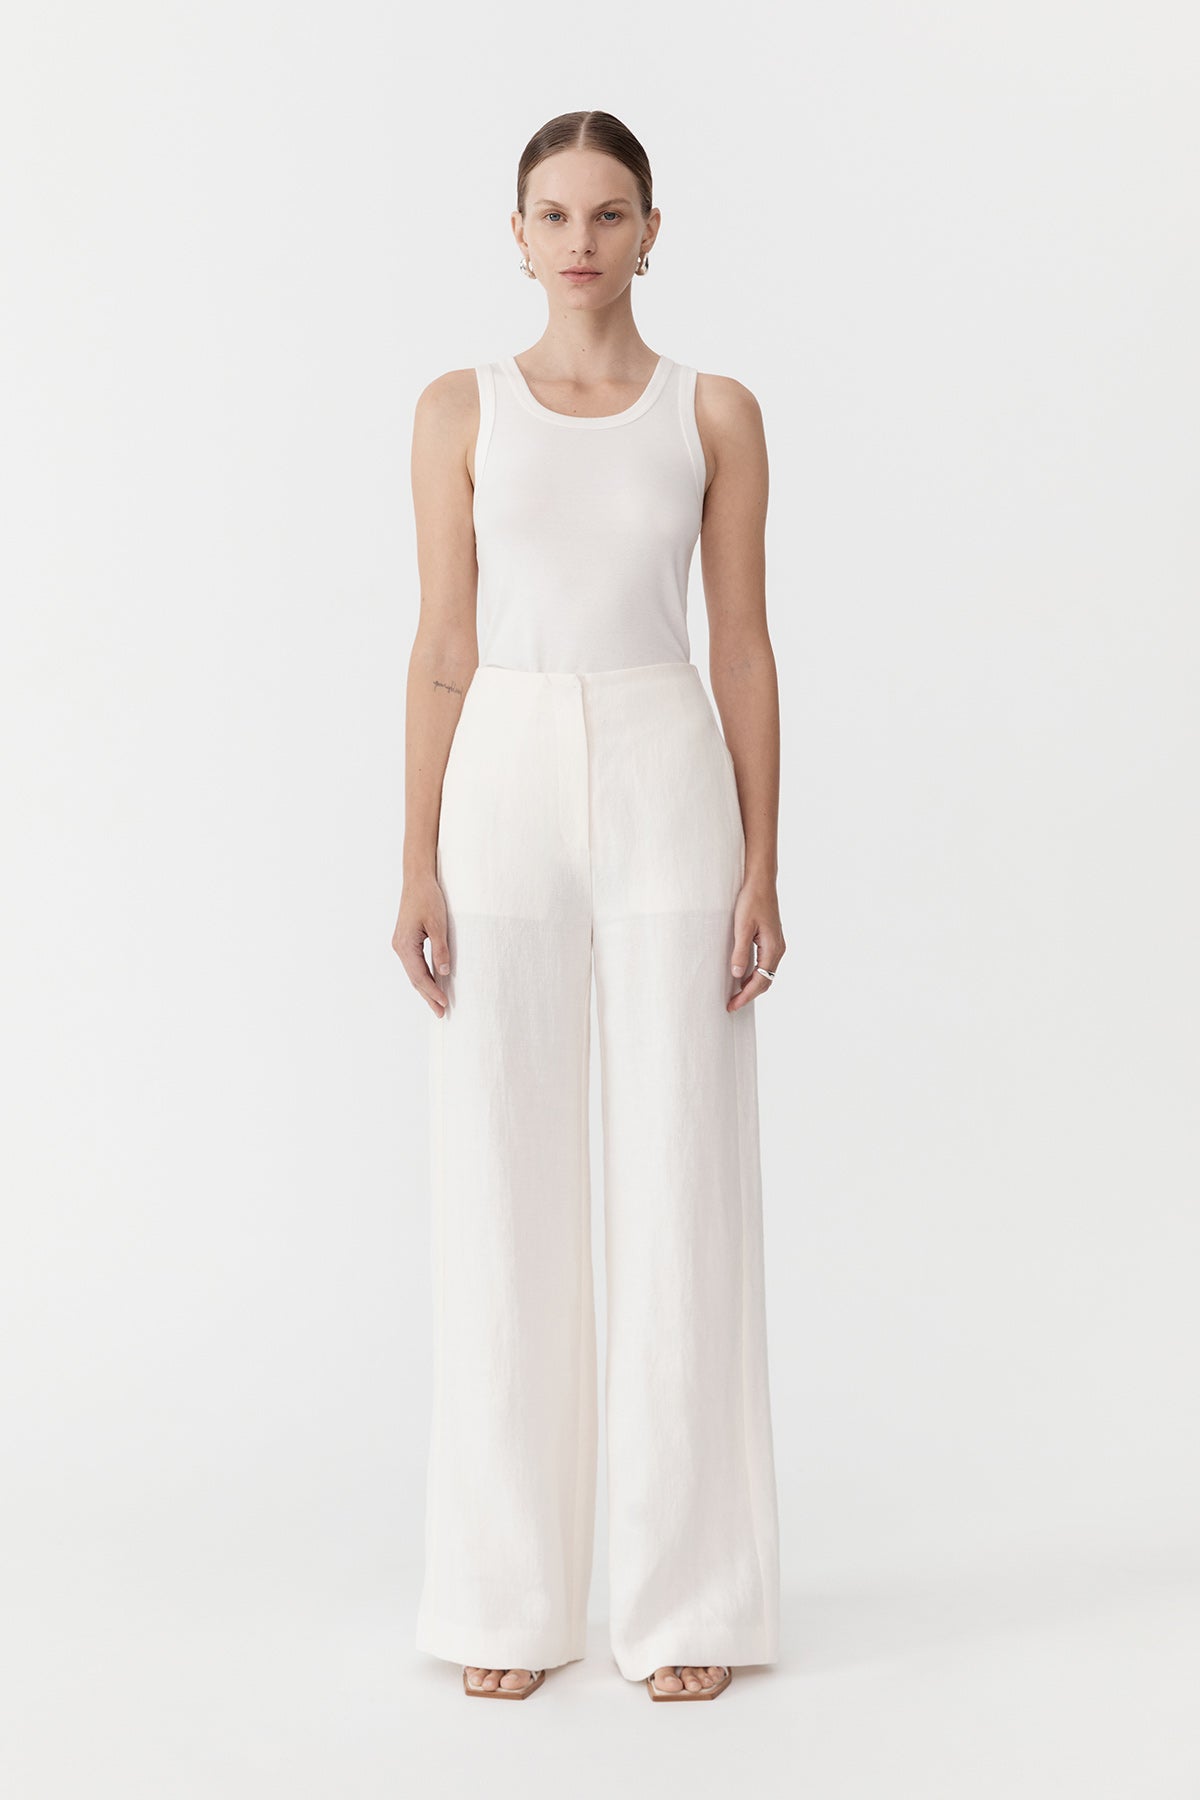 The St Agni Linen Wide Leg Pants in Ivory available at The New Trend Australia